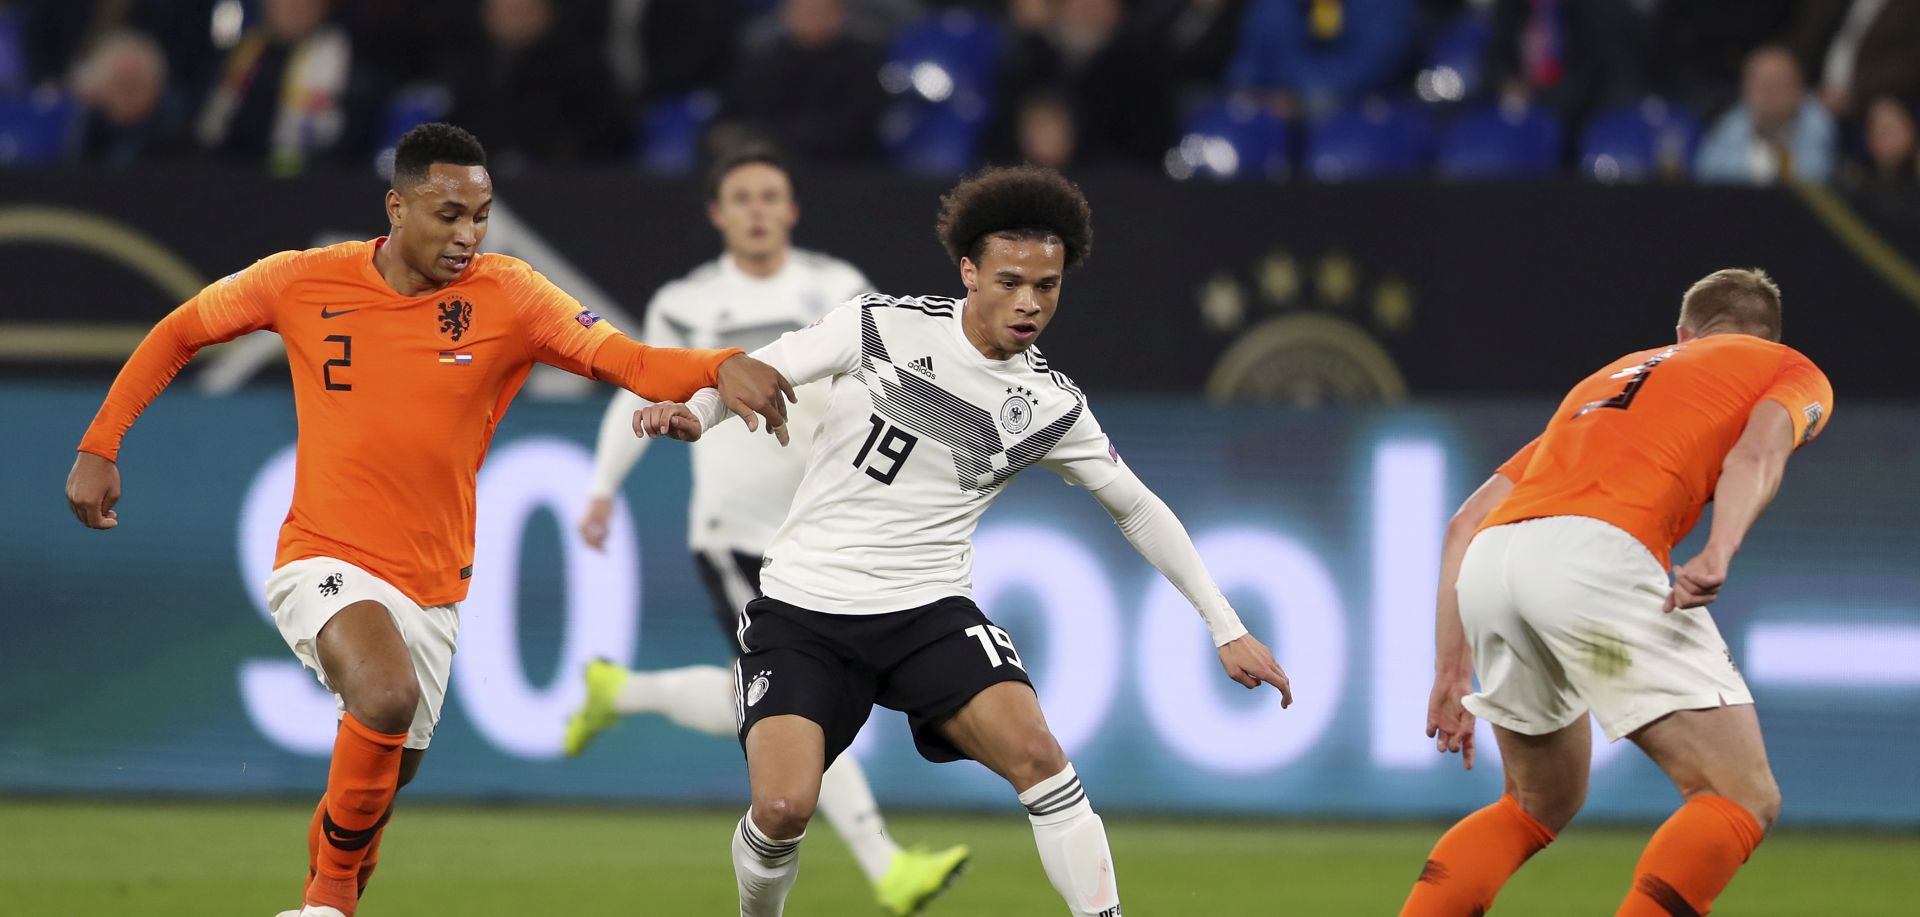 epa07178070 Germany's Leroy Sane (R) in action against Netherland's Kenny Tete (L) during the UEFA Nations League soccer match between Germany and the Netherlands in Gelsenkirchen, Germany, 19 November 2018.  EPA/FRIEDEMANN VOGEL